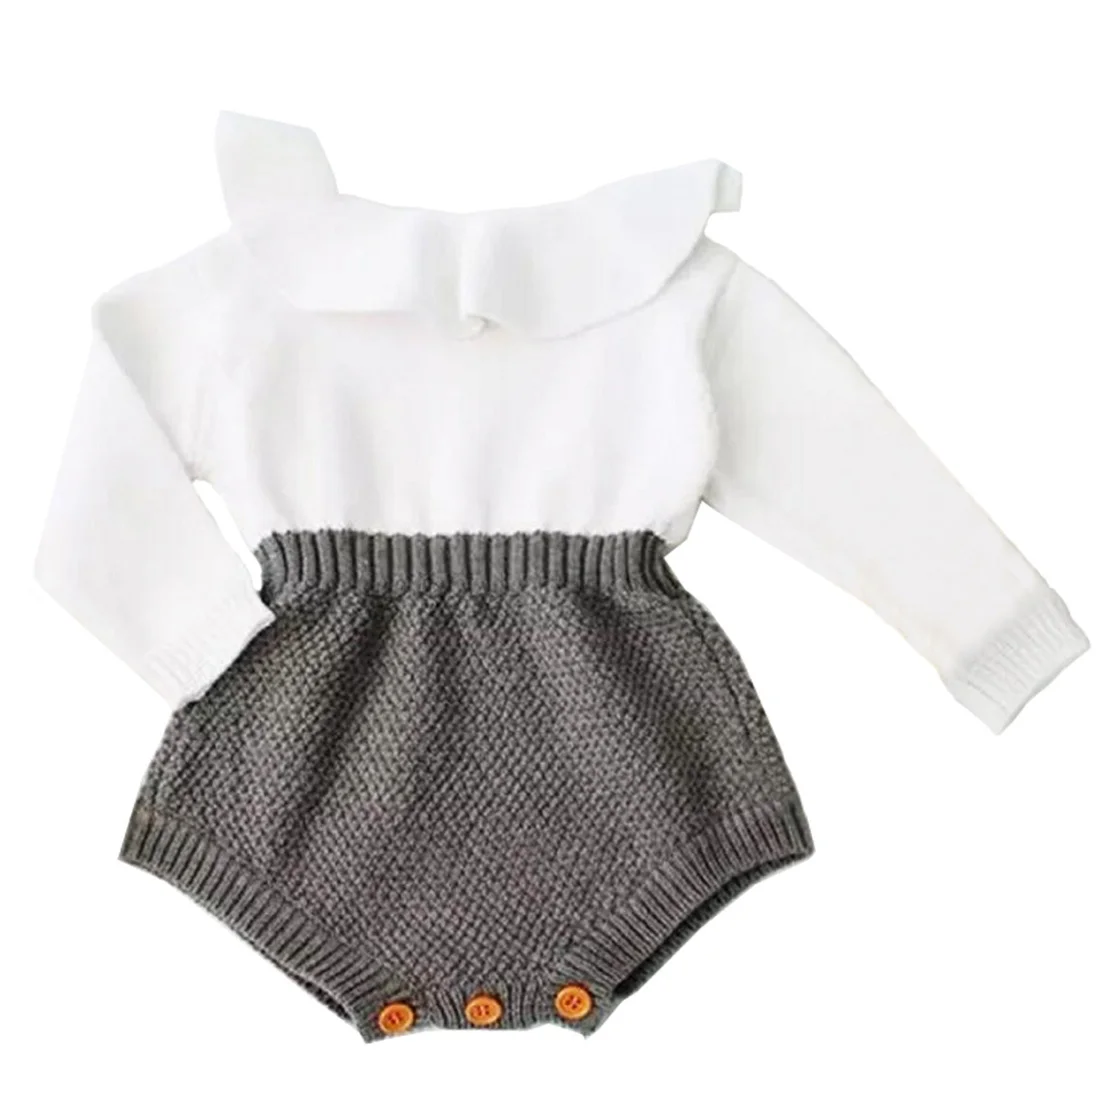 Newborn-Baby-Girl-Clothing-Rompers-Wool-Knitting-Tops-Long-Sleeve-Romper-Warm-Outfits-Clothes-Baby-Girls.jpg